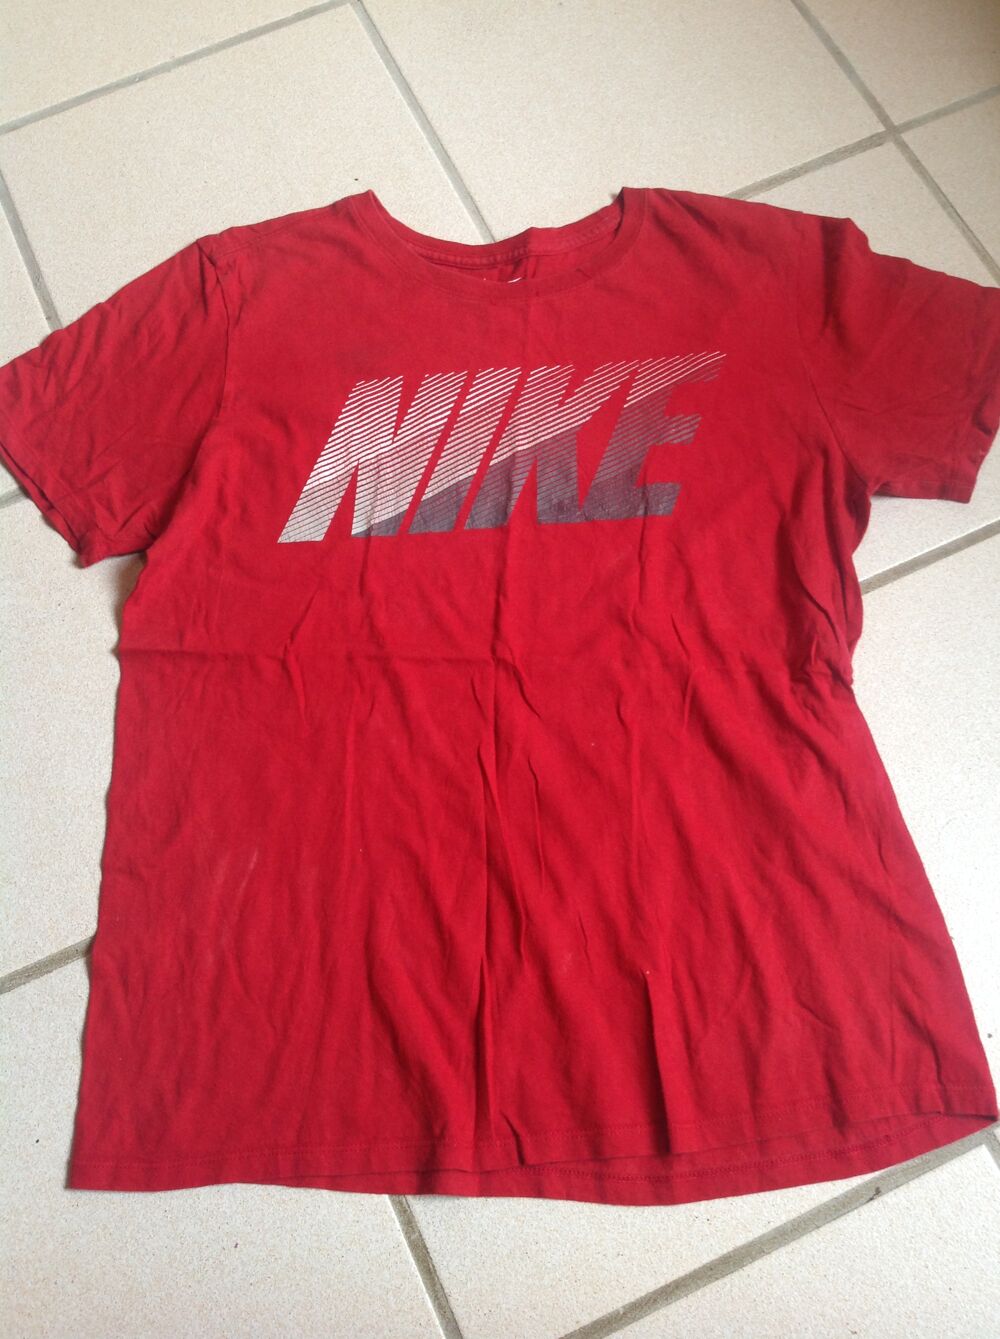 TEE SHIRT NIKE ROUGE TAILLE M Envoi Possible
Vtements